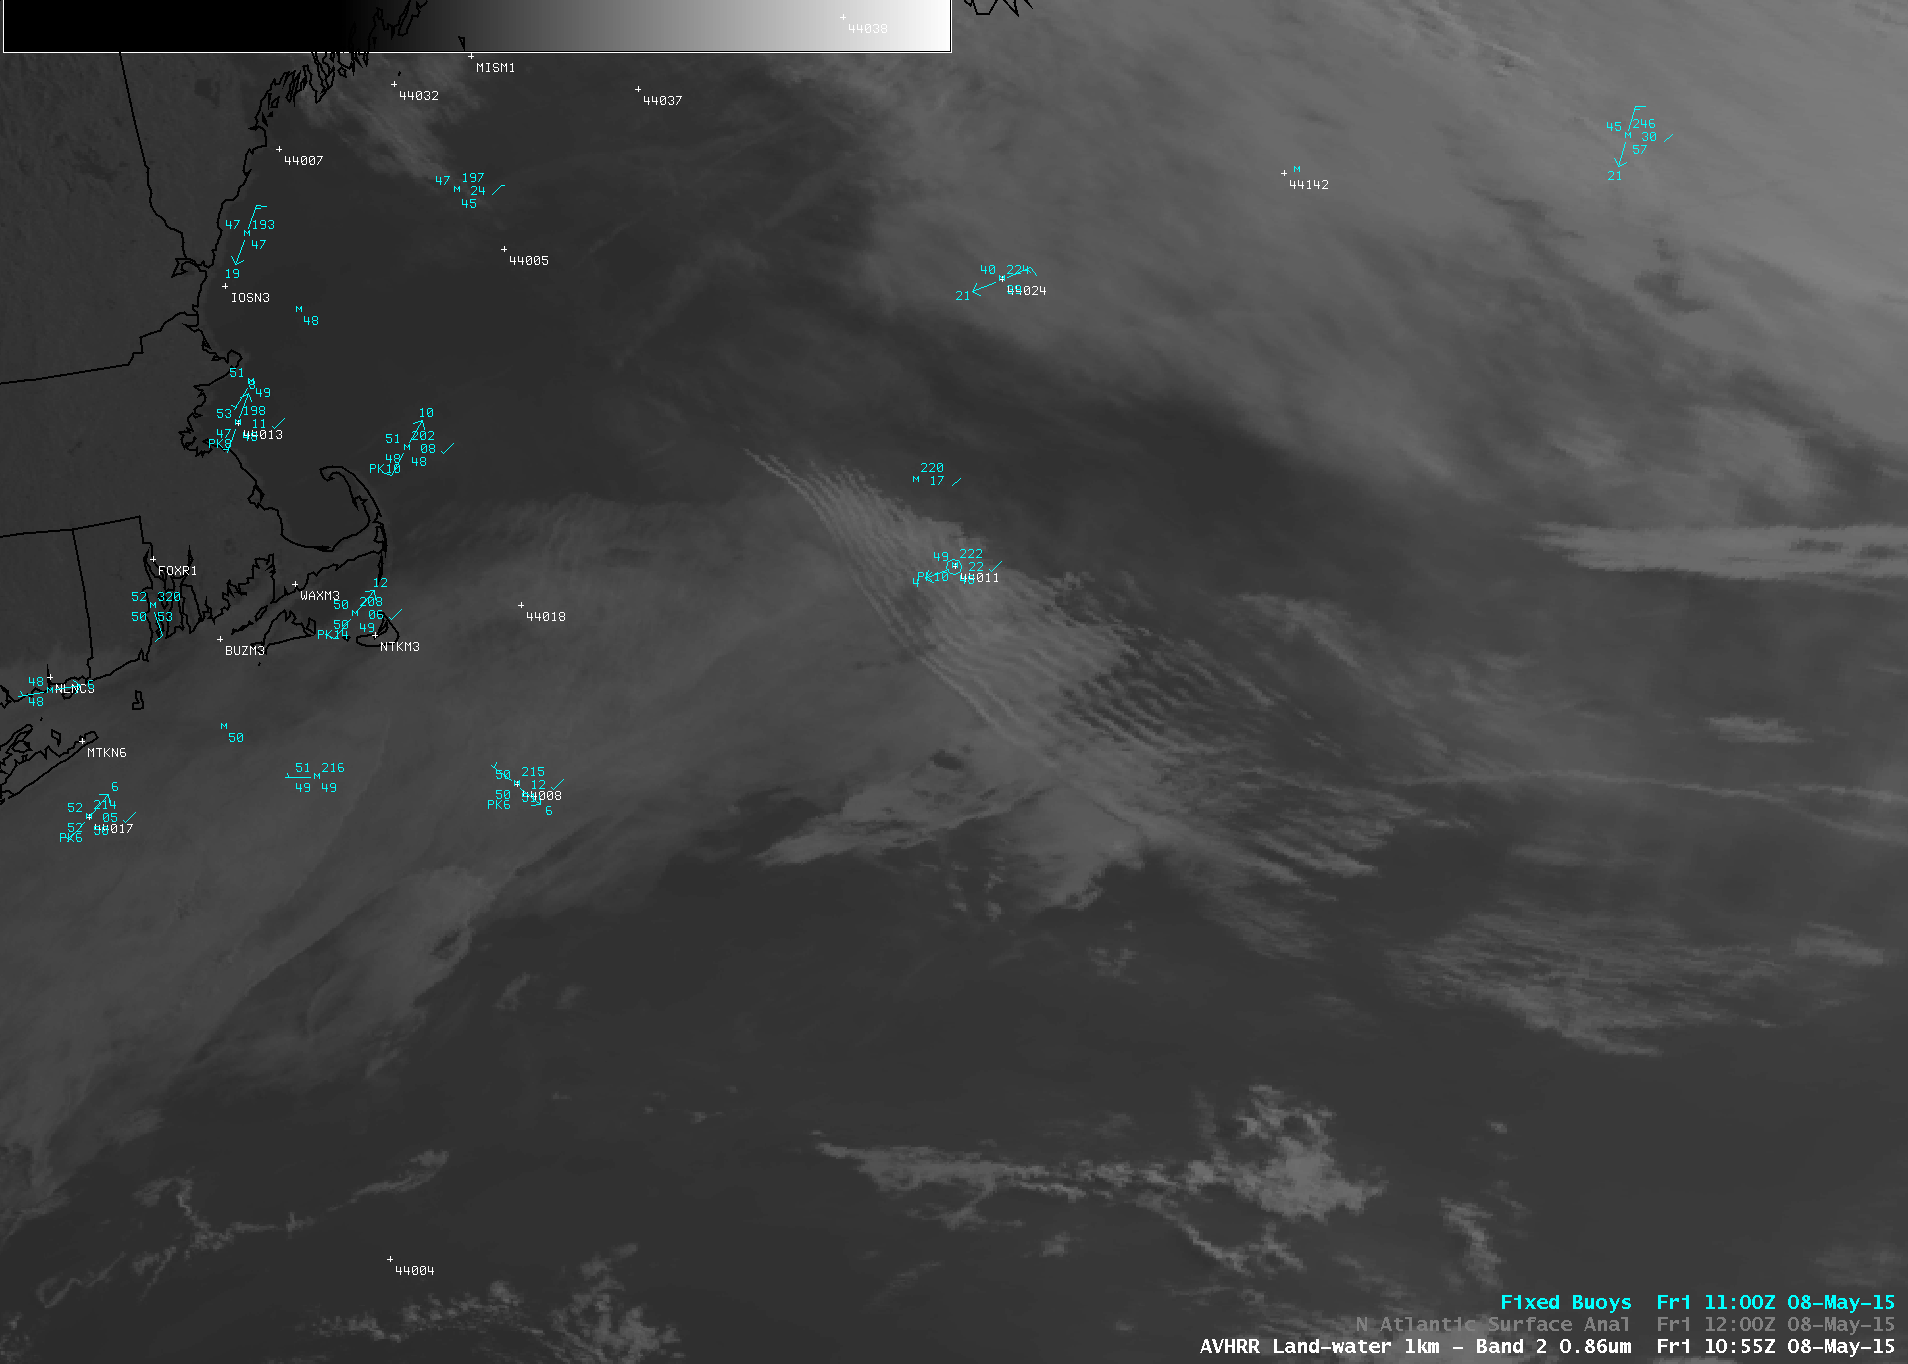 POES AVHRR 0.86 µm Visible image and 12.0 µm Infrared image at 1055 UTC on 8 May 2015 (click to enlarge)